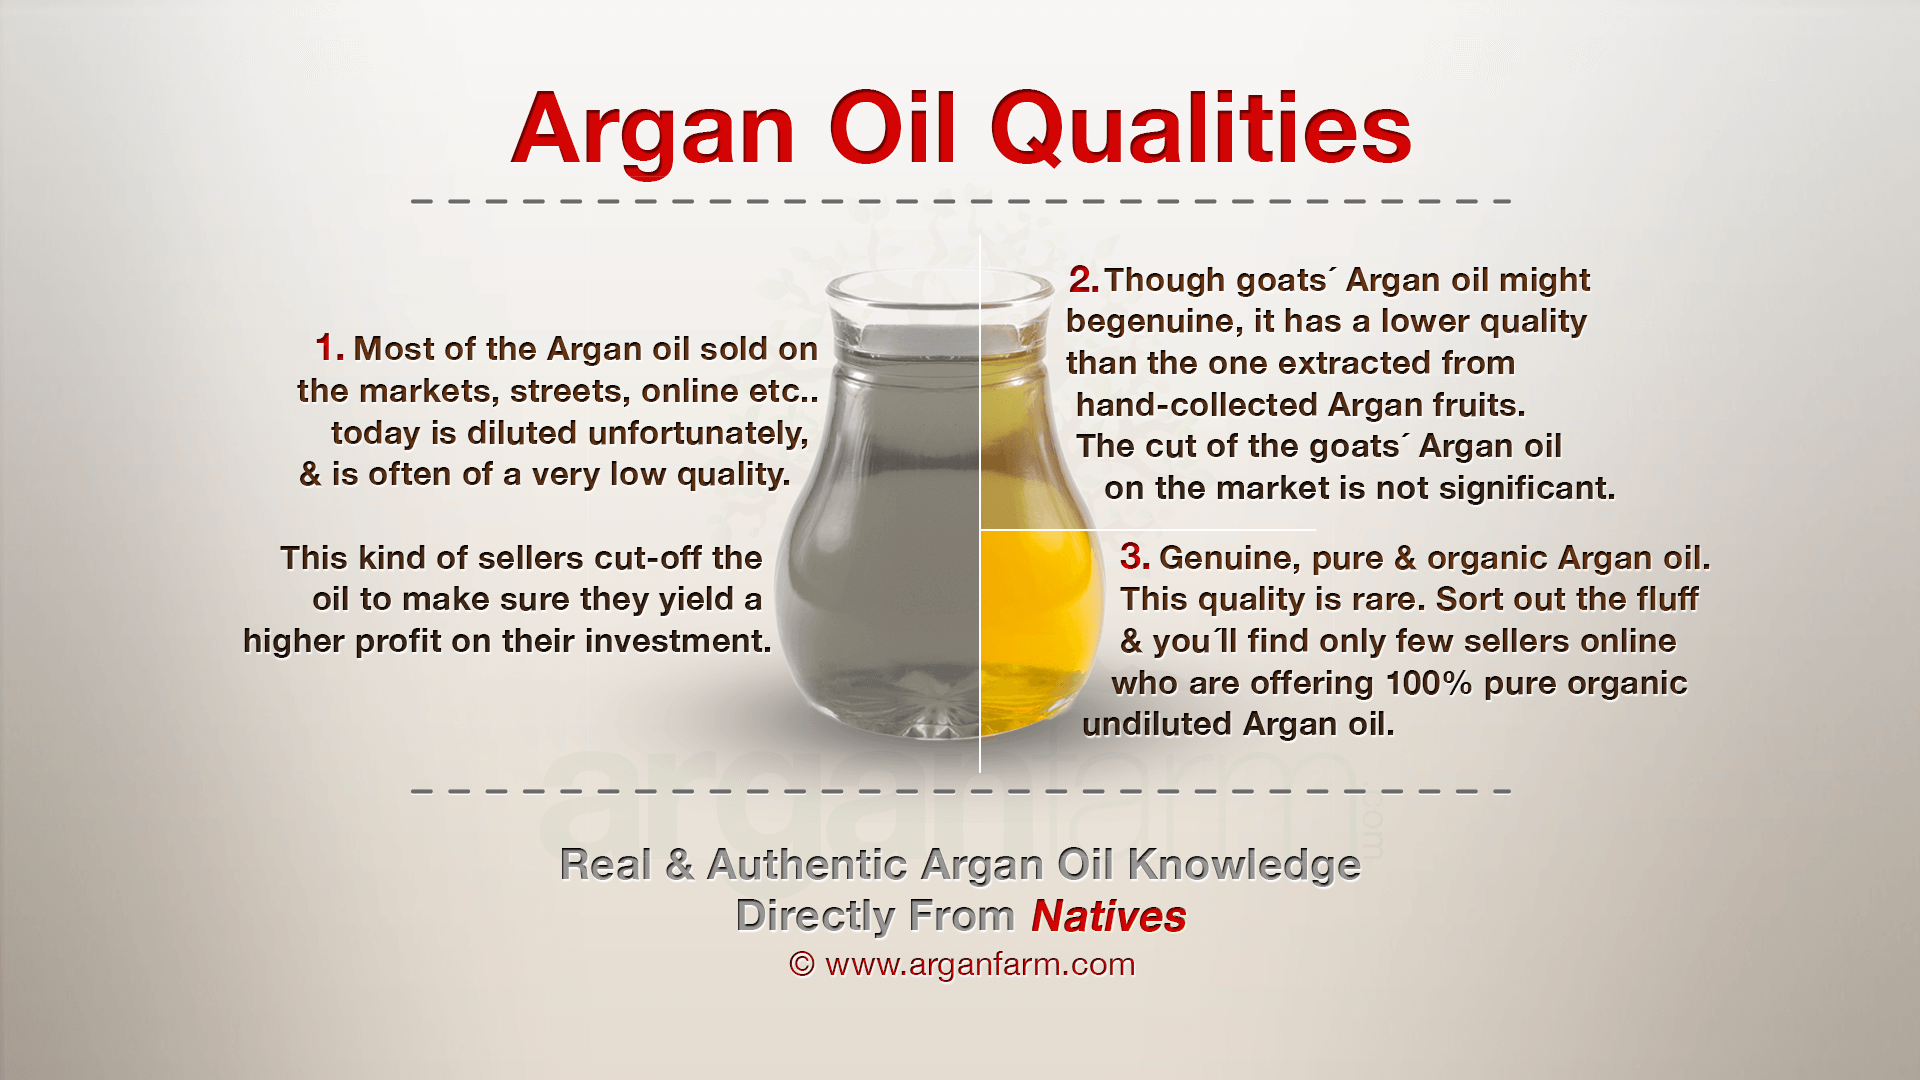 The Different Argan Oil Qualities On The Markets